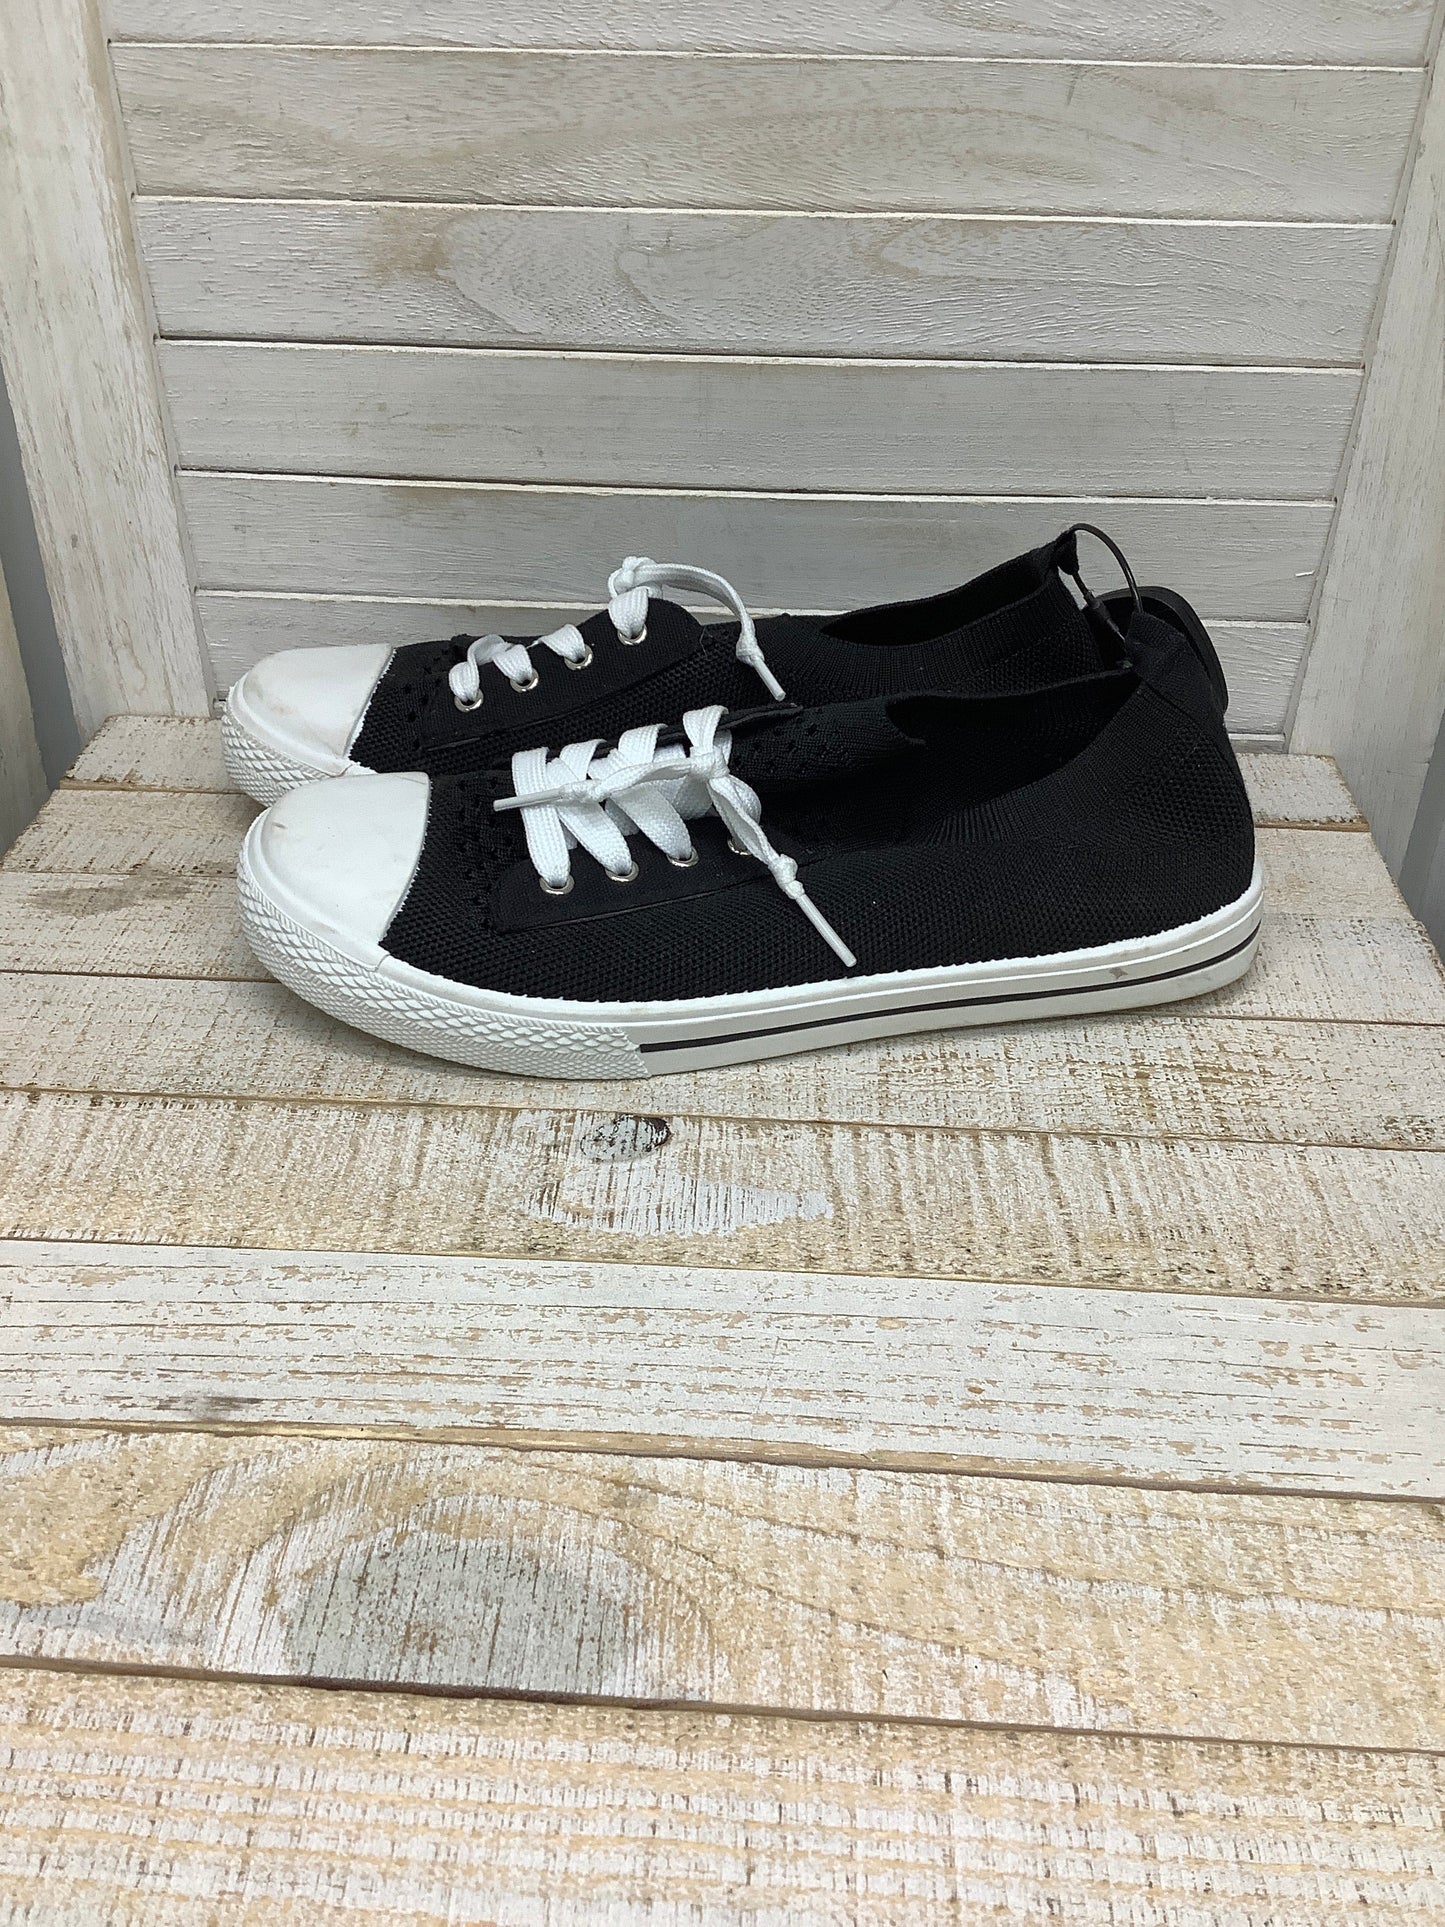 Black Shoes Sneakers Clothes Mentor, Size 8